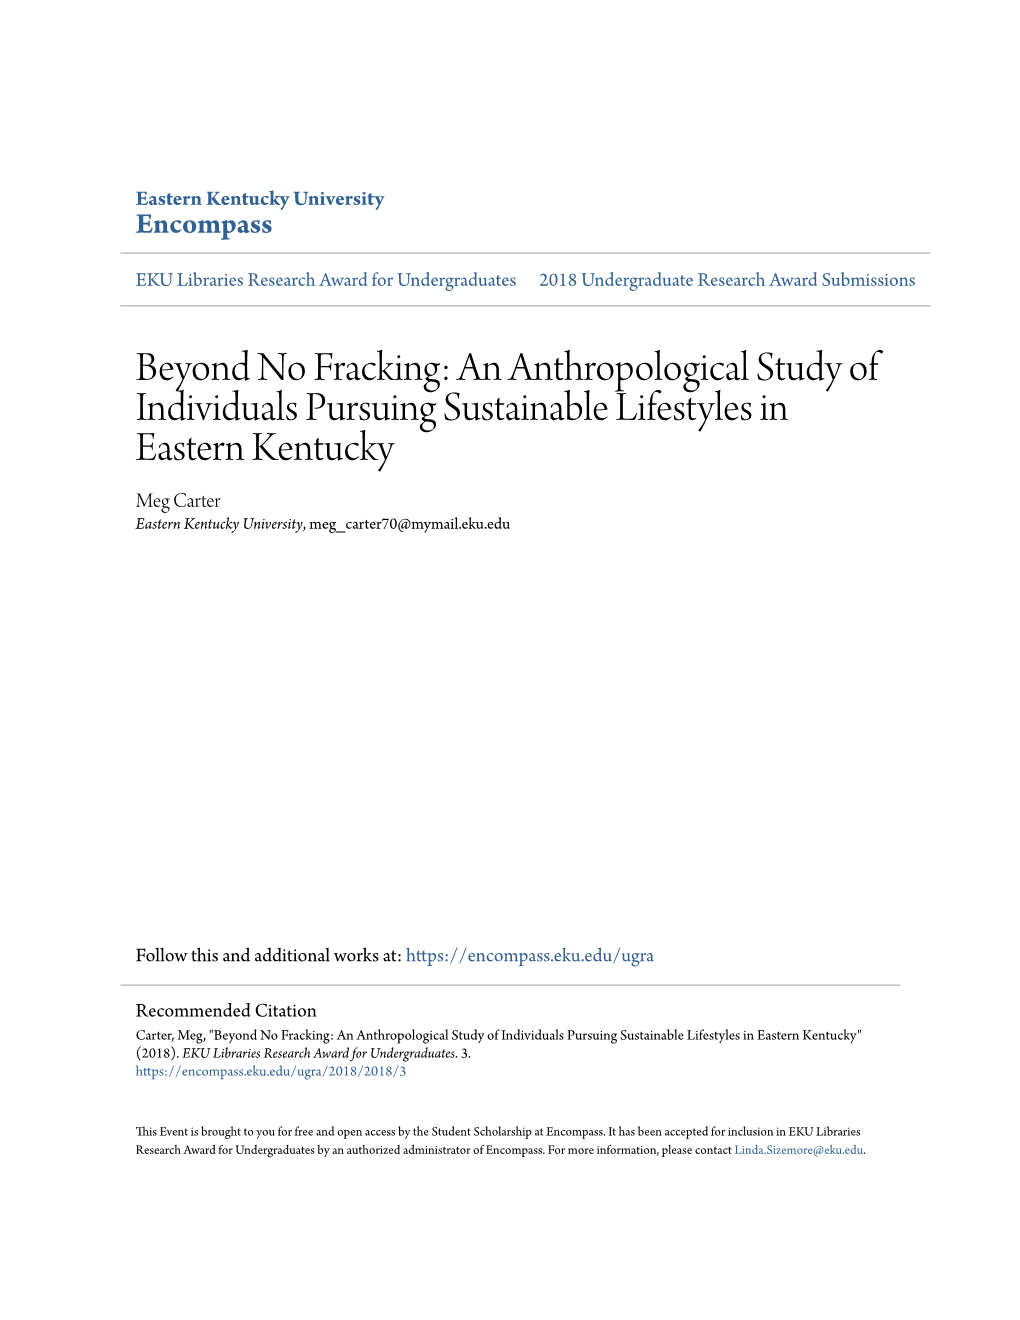 Beyond No Fracking: an Anthropological Study of Individuals